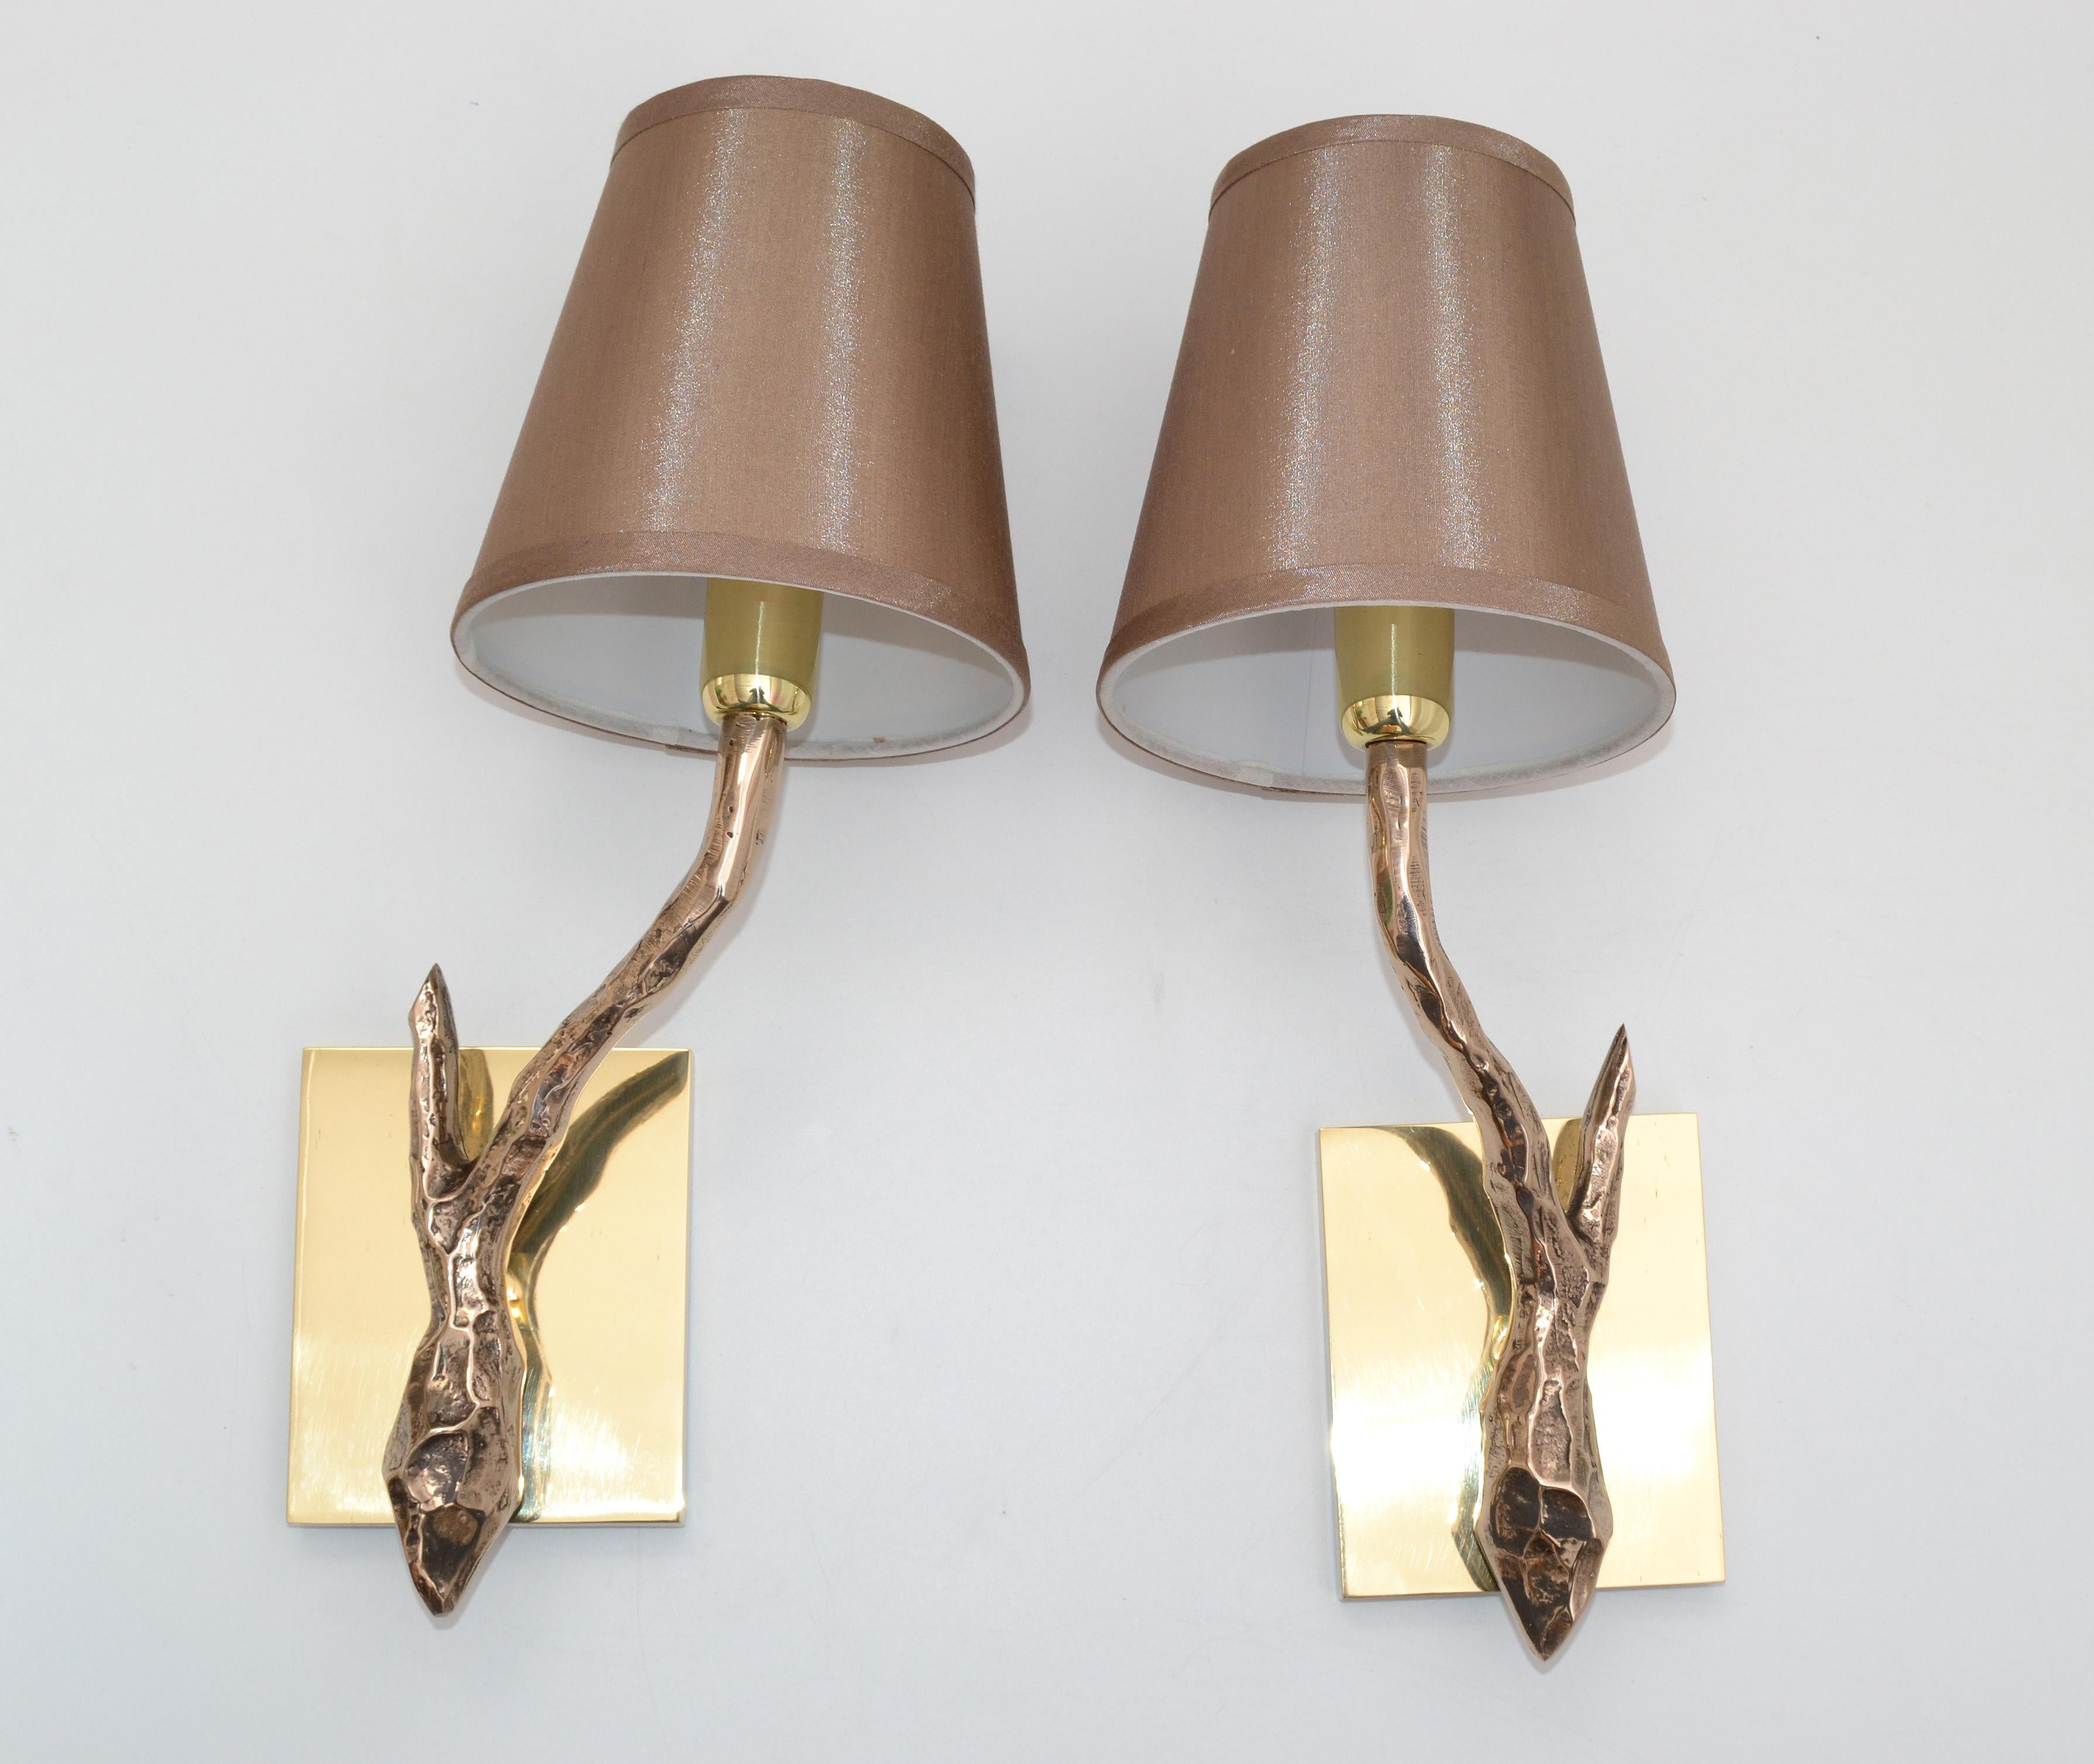 Pair of Agostini Style Sconces Bronze with Gold Metallic Shades, France, 1950s In Good Condition For Sale In Miami, FL